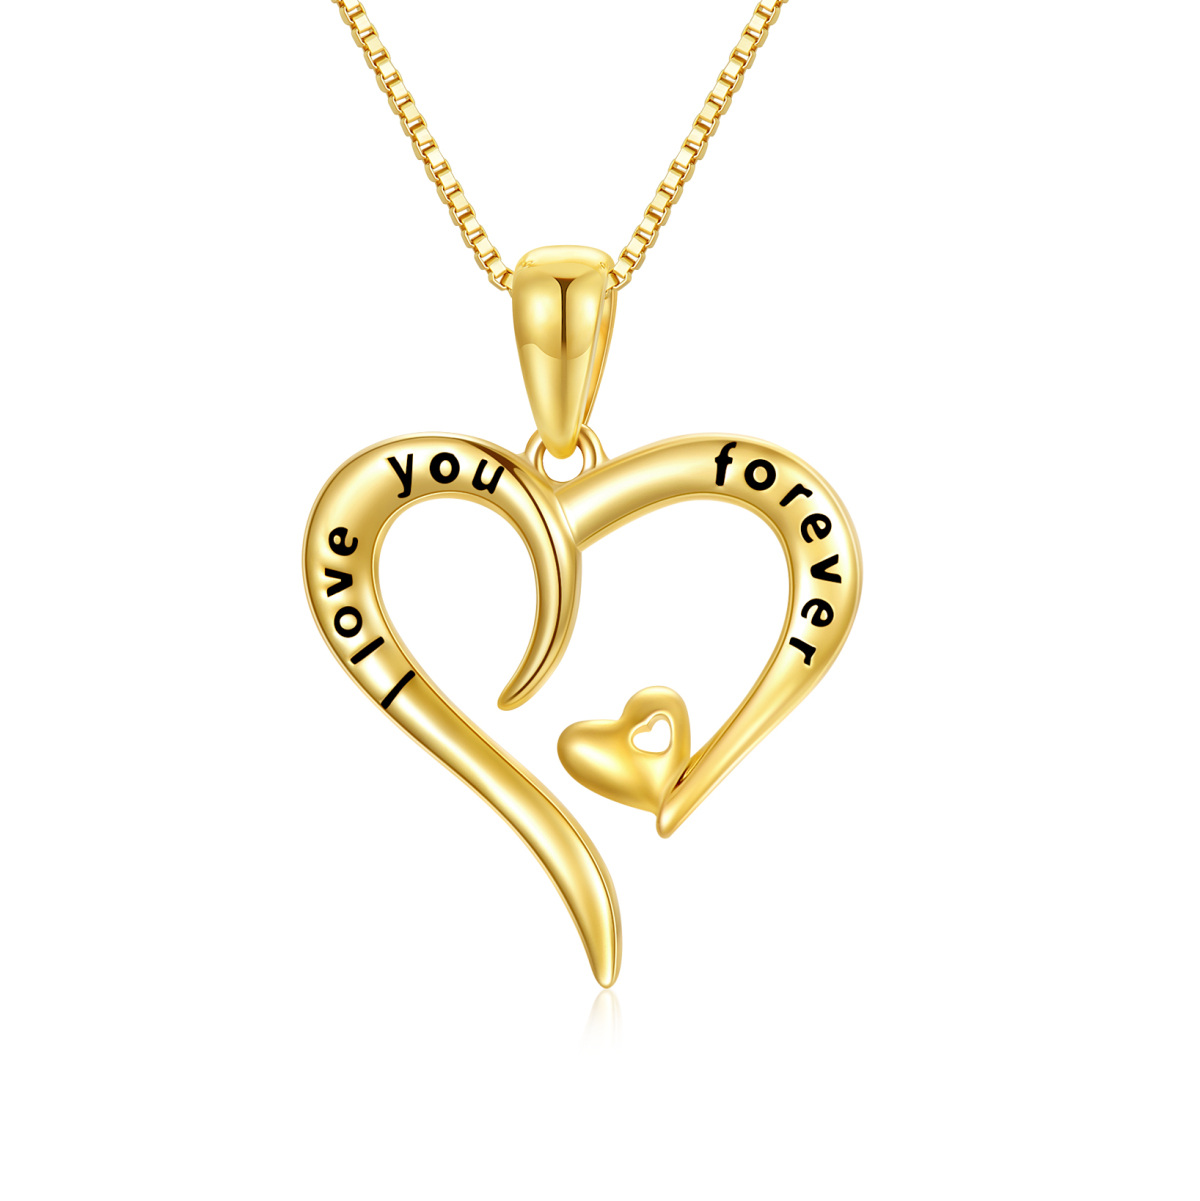 14K Gold Heart With Heart Pendant Necklace with Engraved Word-1